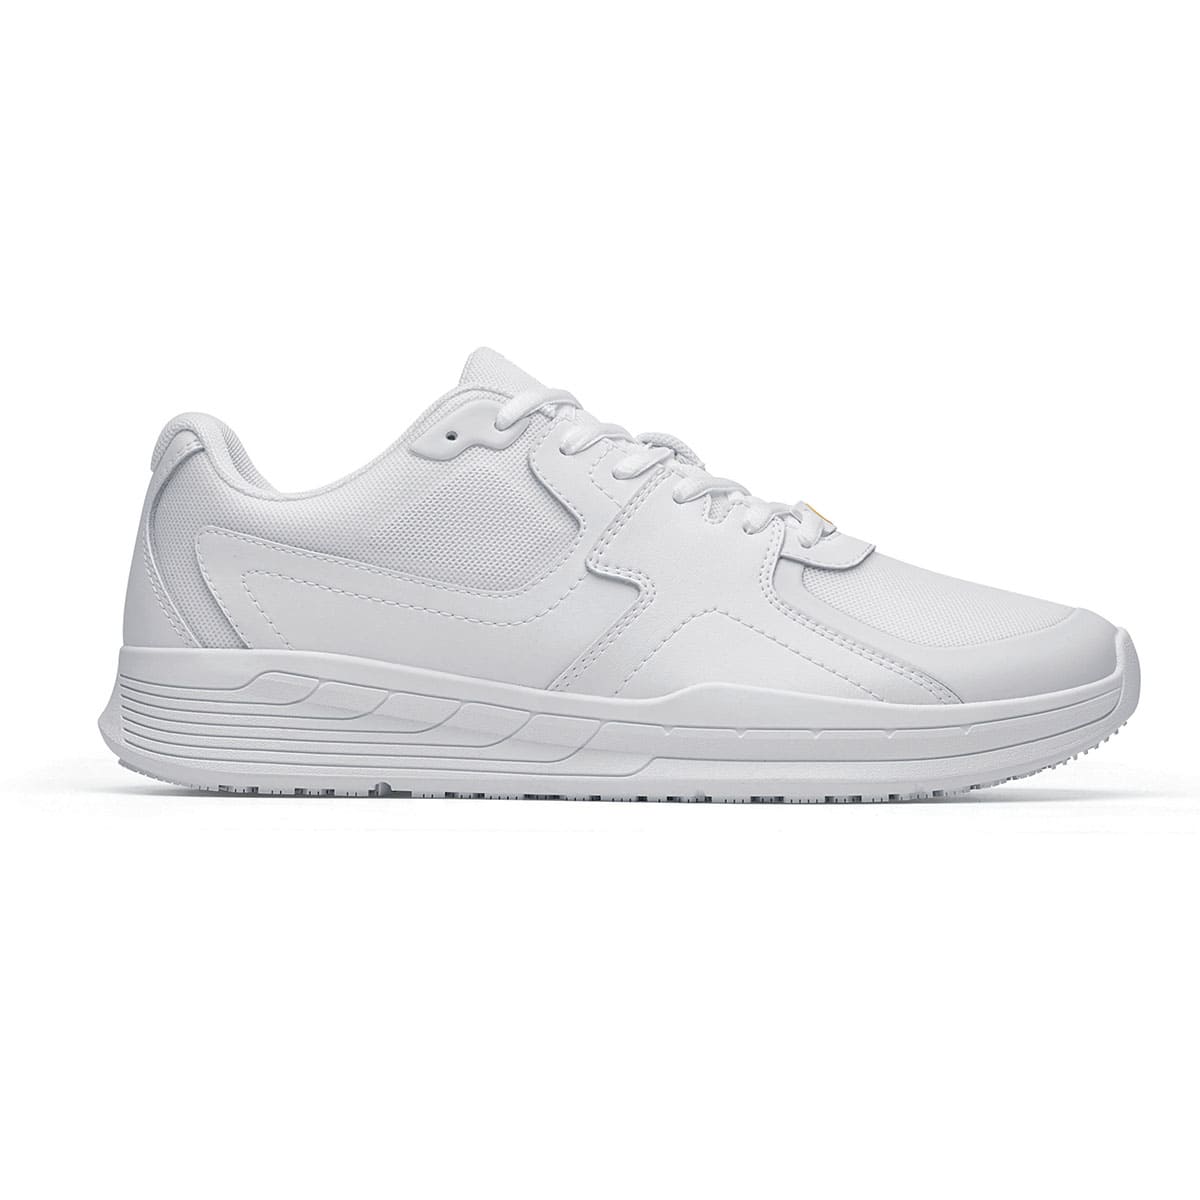 The Shoes for Crews Condor II Unisex White trainers feature a slip-resistant outsole and an easy-to-clean, breathable fabric upper with SpillGuard protection, seen from the right.